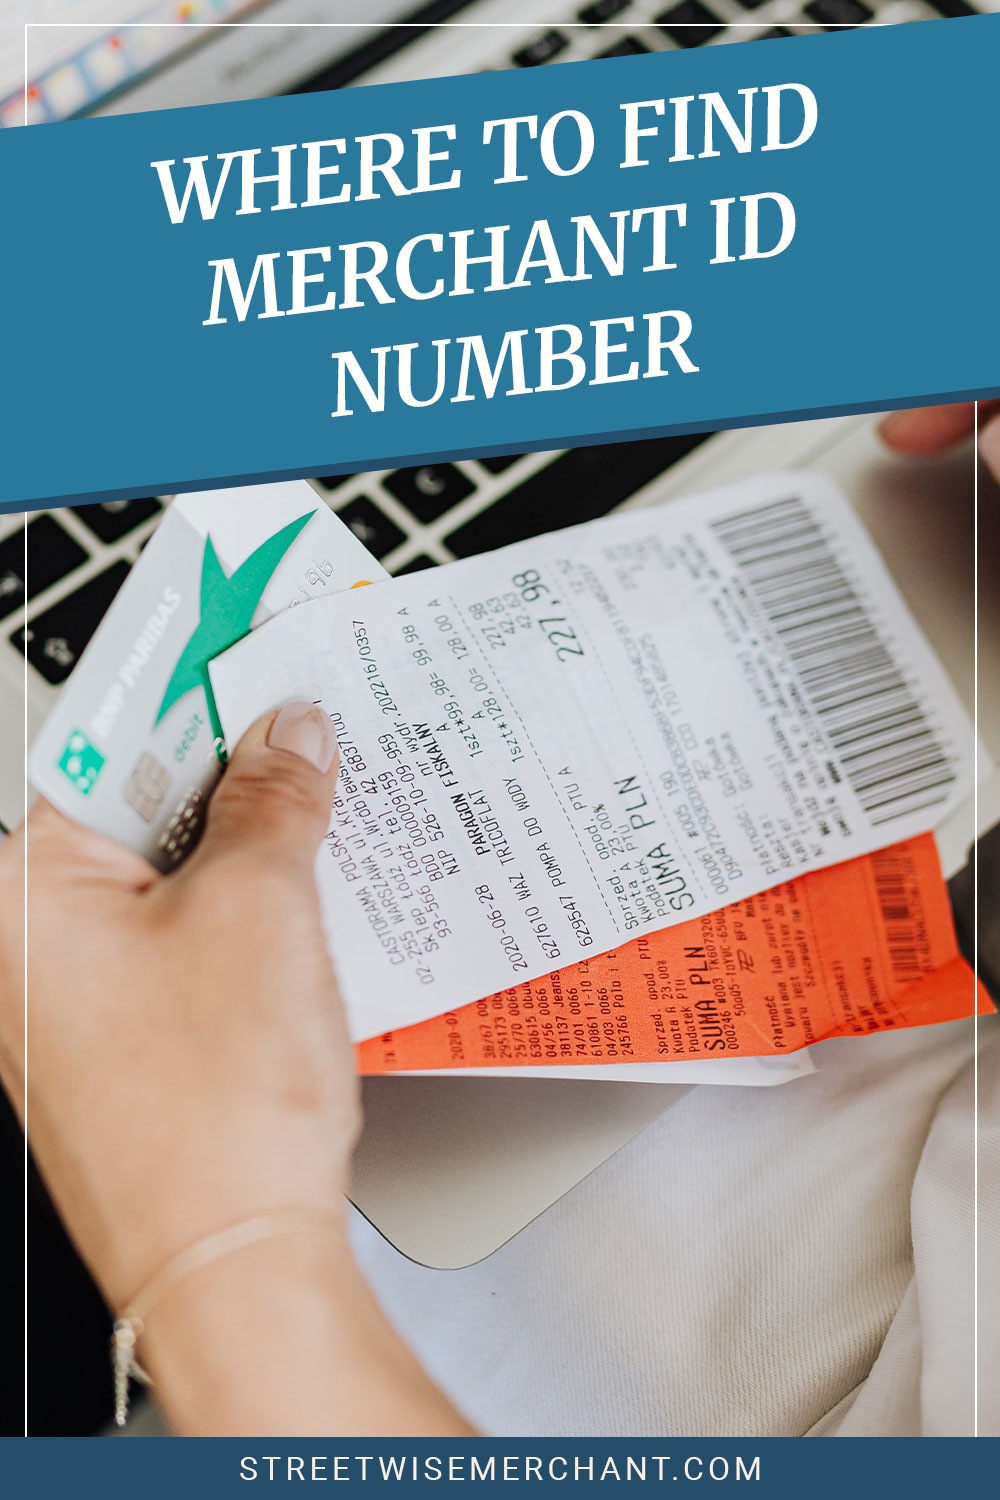 Where To Find Merchant Id Number